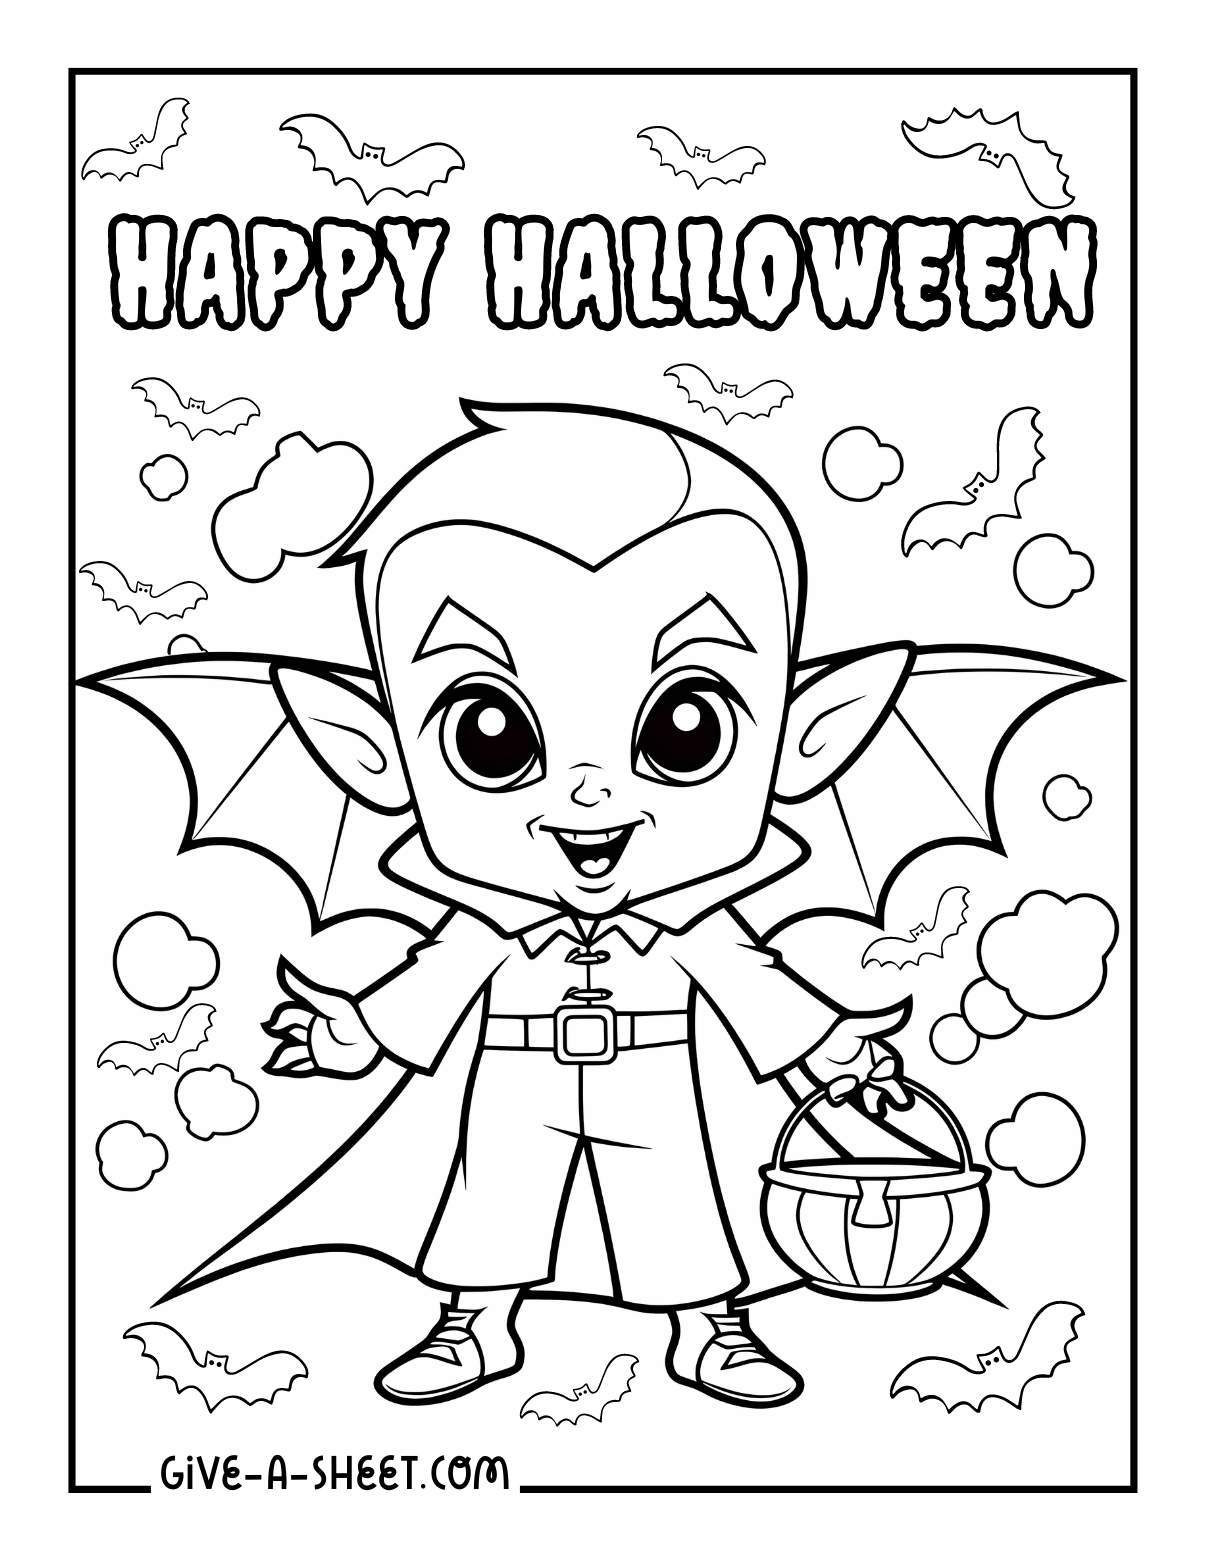 Halloween bats costume coloring page.